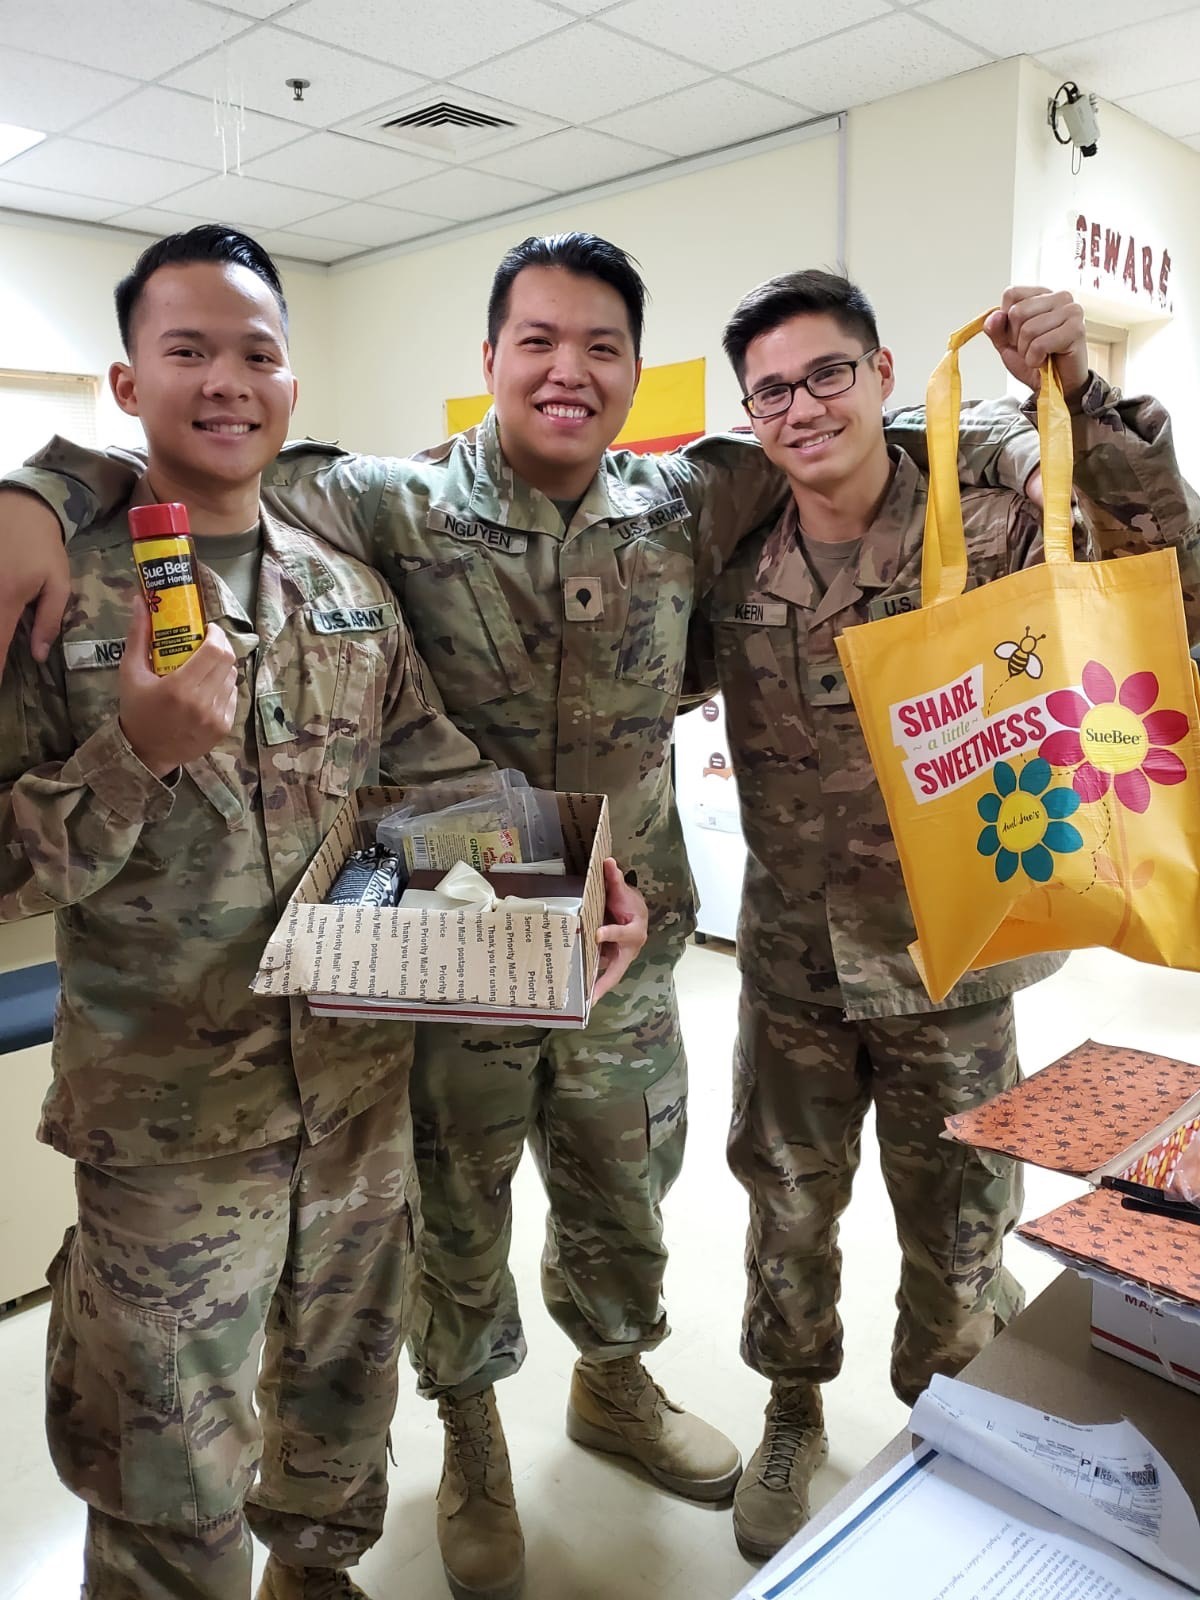 Soldiers' Angels and Sioux Honey Team Up to Support Deployed Military